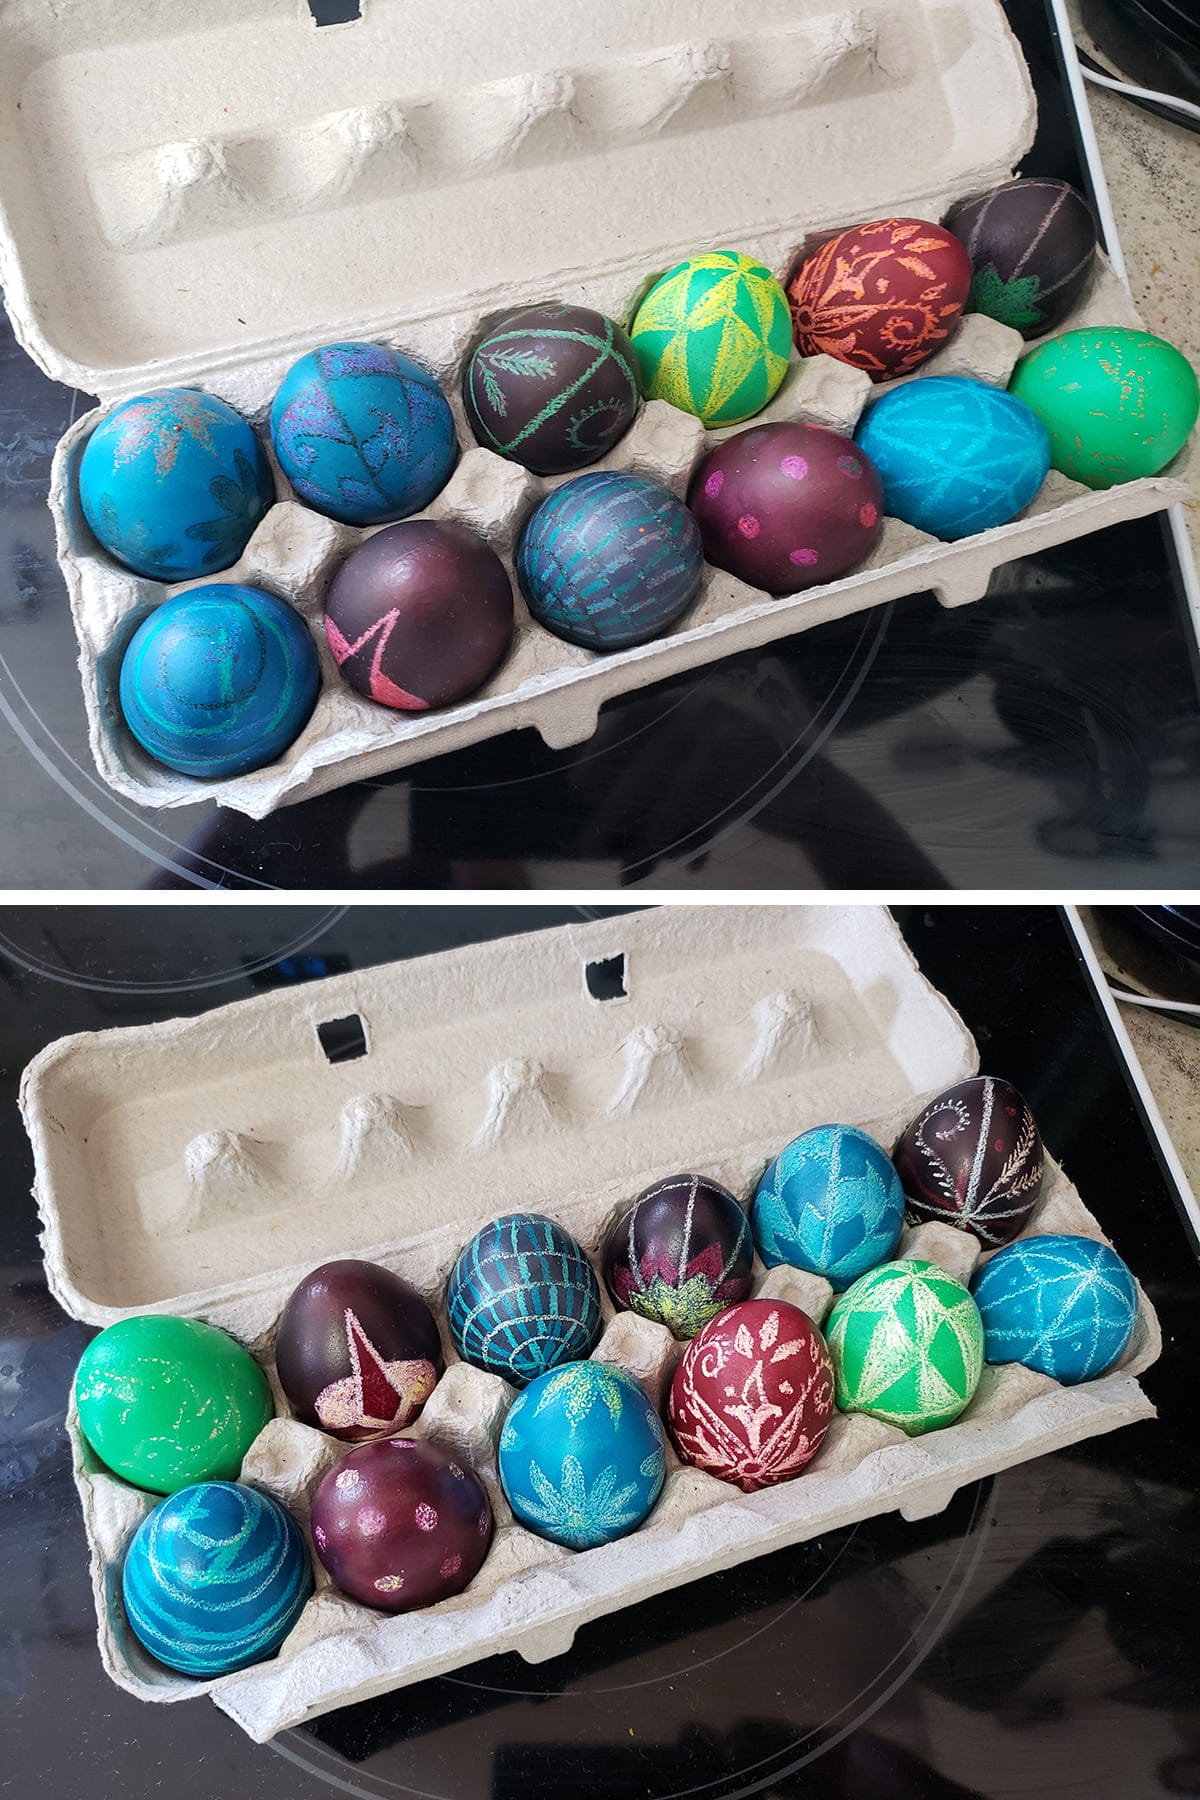 A two part compilation image, showing a dozen coloured eggs in an egg carton, before and after melting the wax off it.